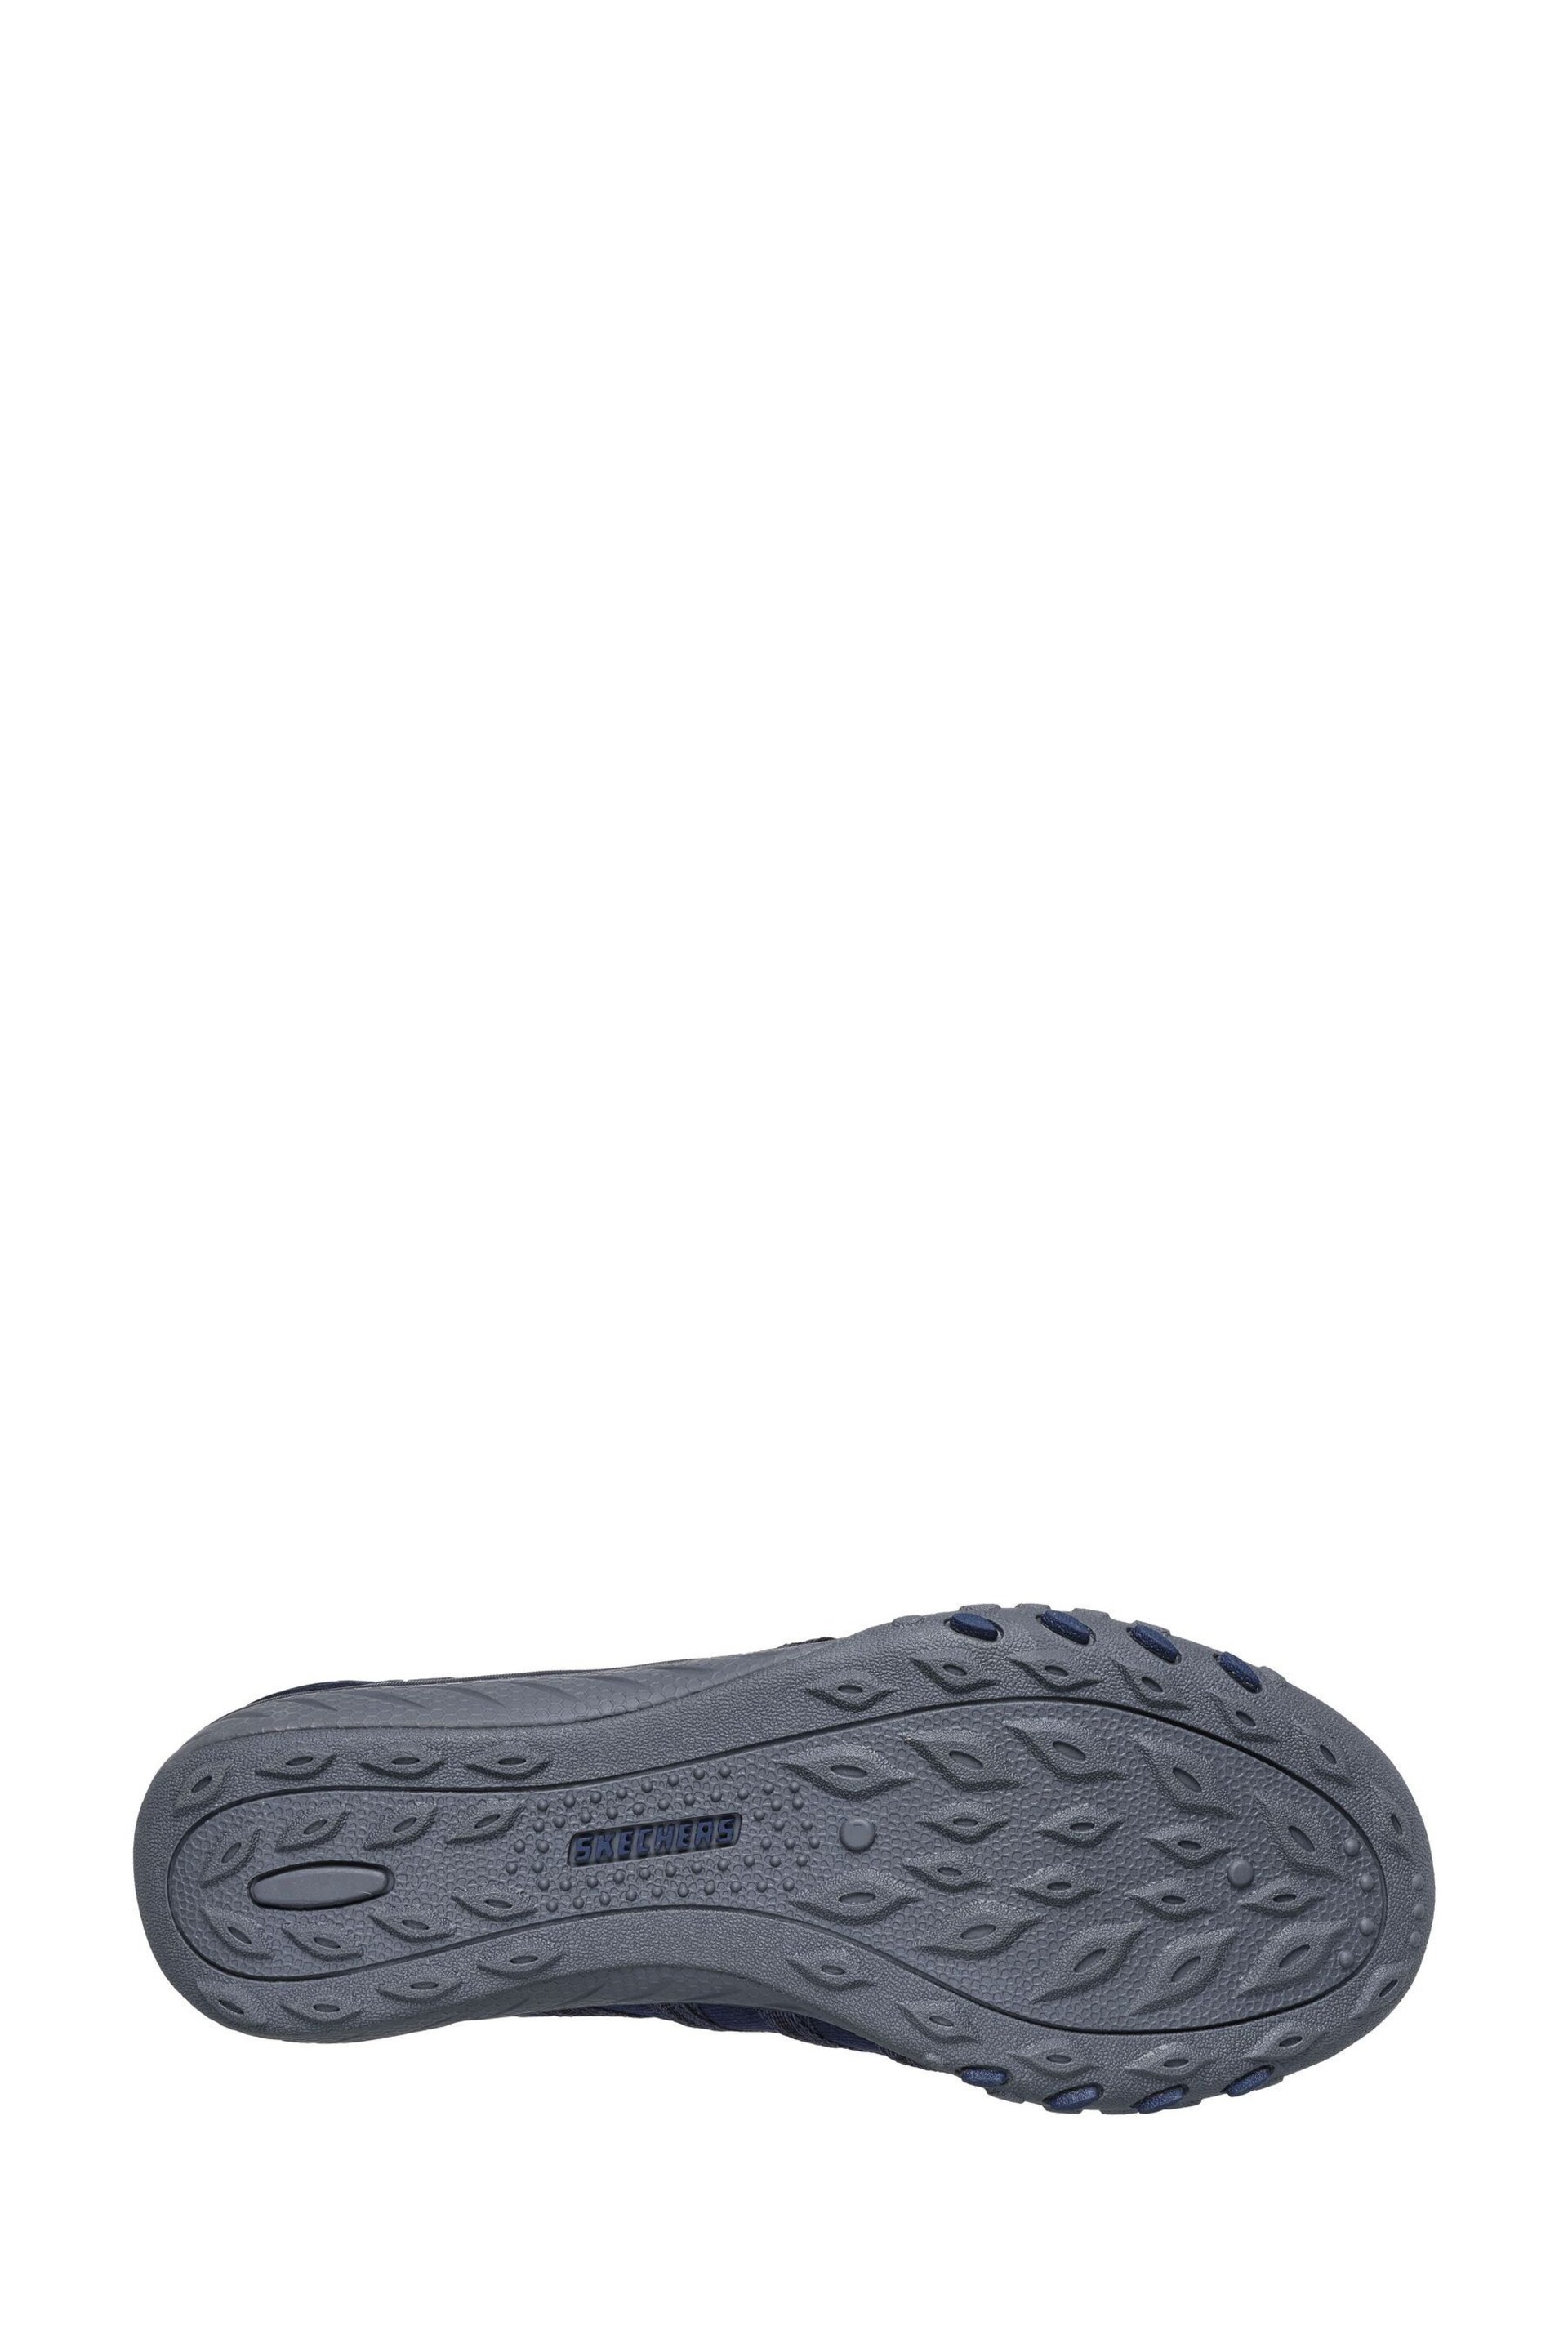 Skechers Blue Breathe Easy Roll With Me Trainers - Image 3 of 5